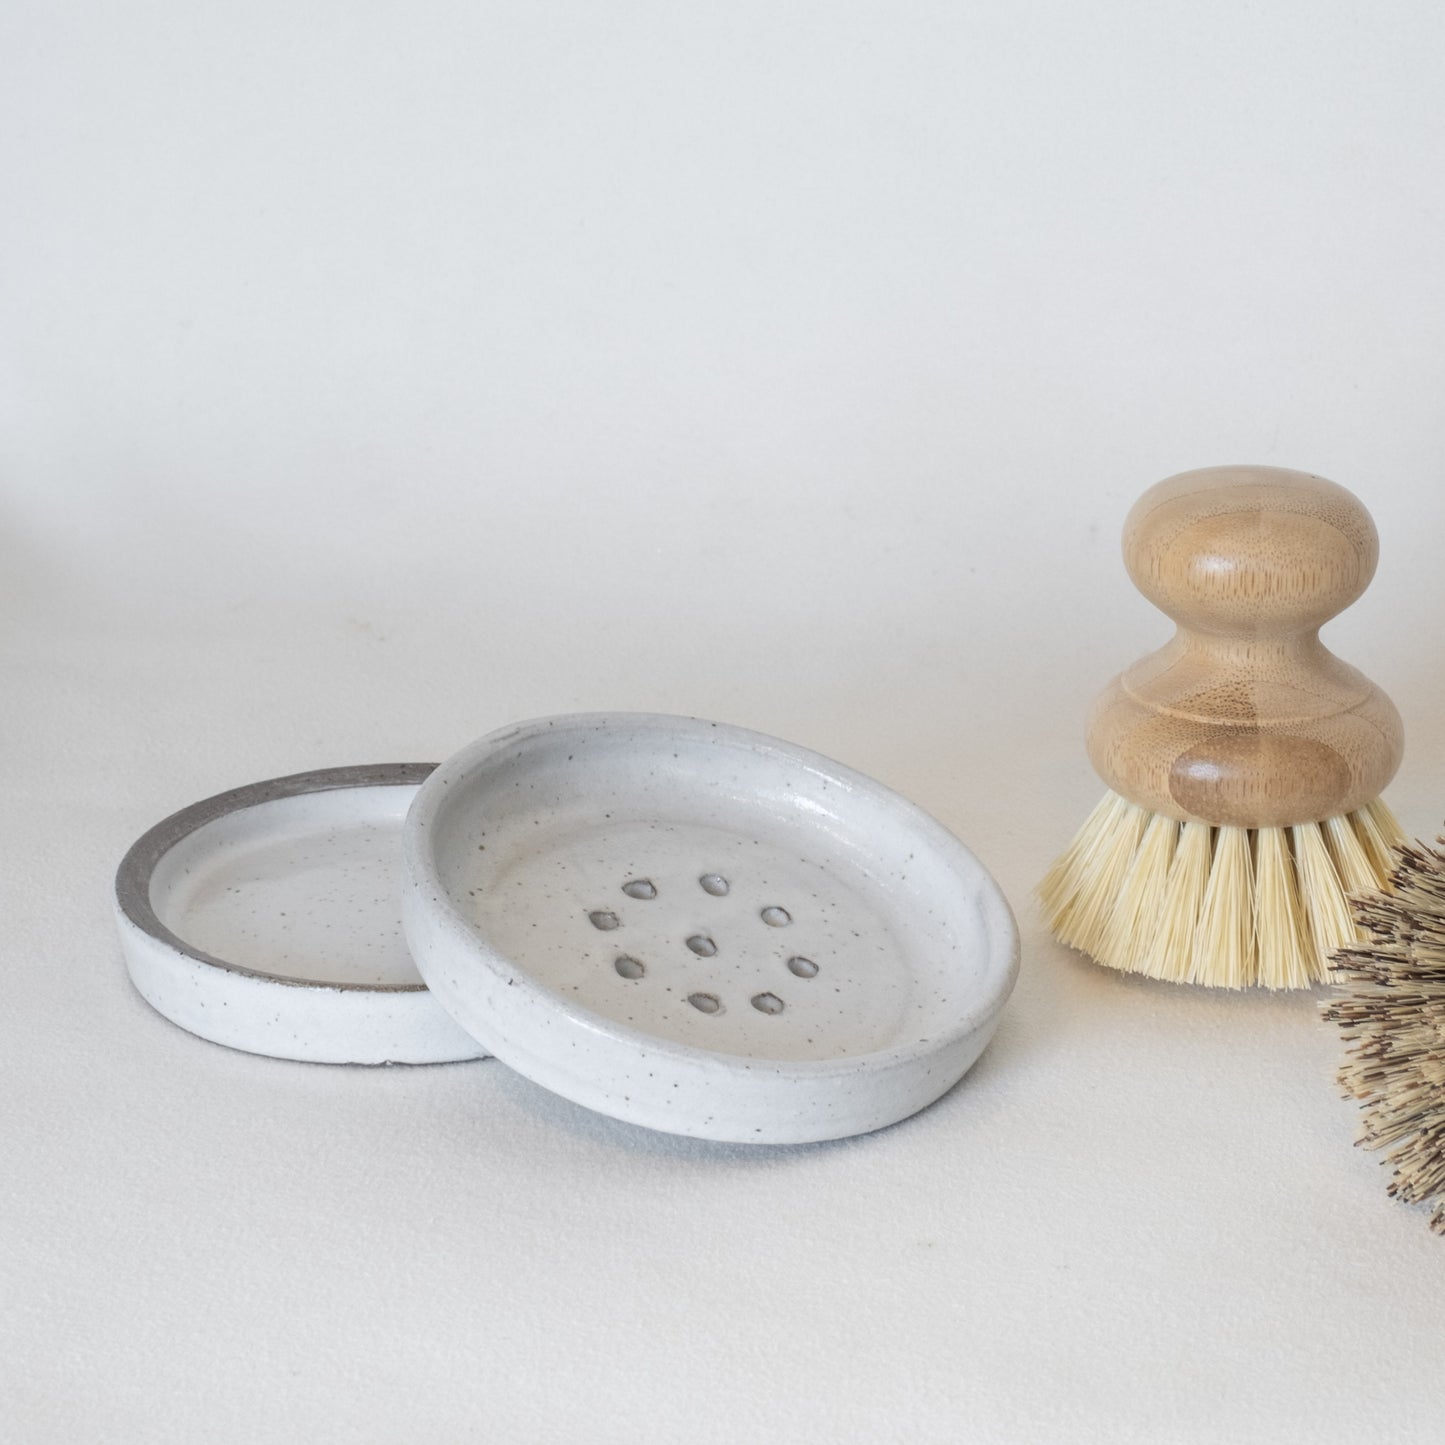 Handmade Pottery Clove Soap Dish or Dish Brush Holder with Catching Tray